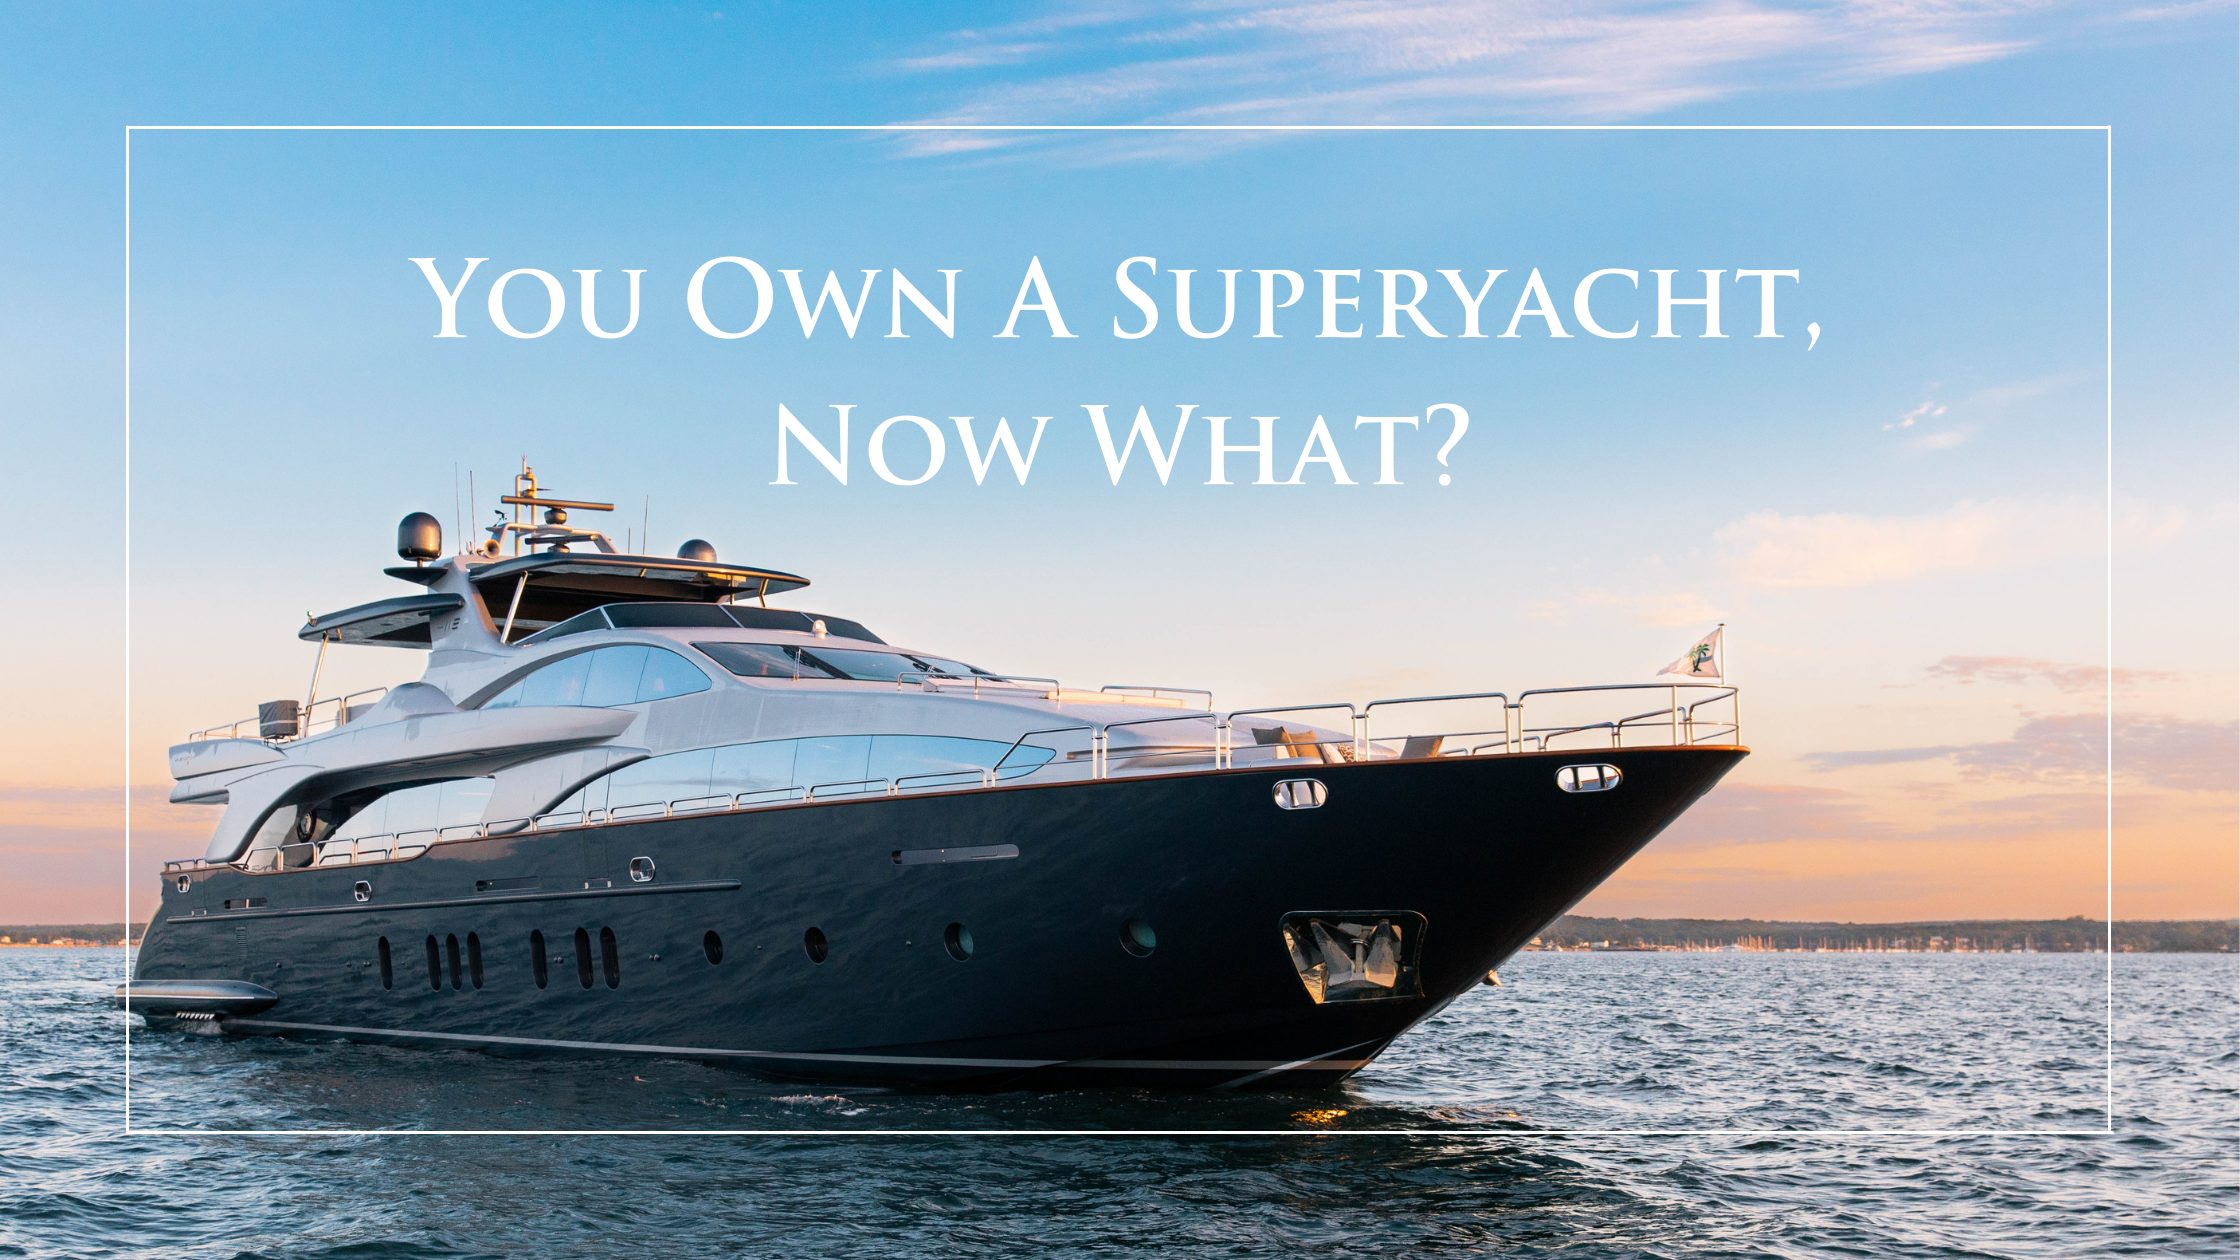 You Own a Superyacht, Now What?